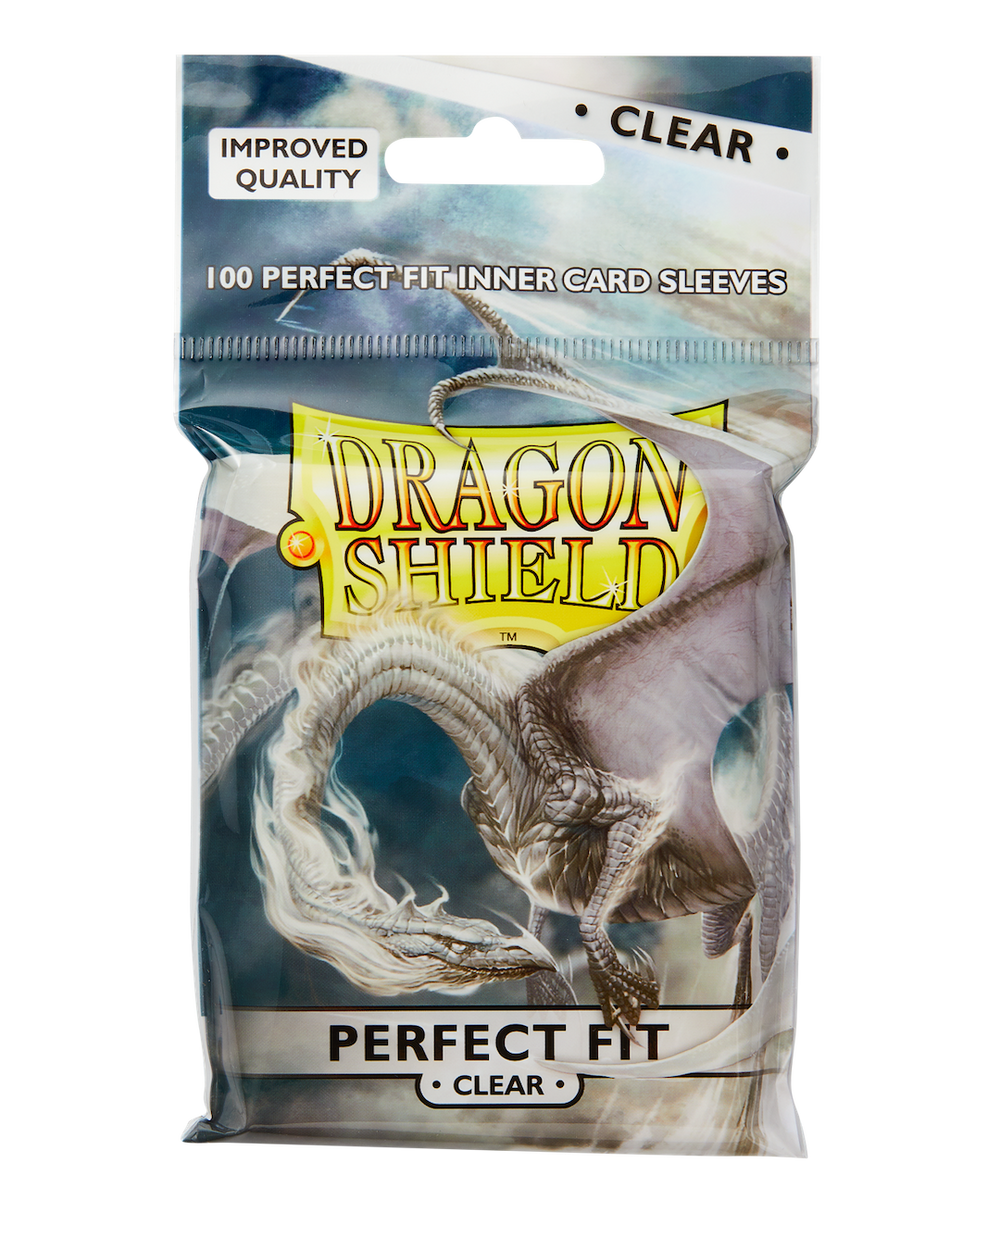 Dragon shield - Perfect Fit Sleeves